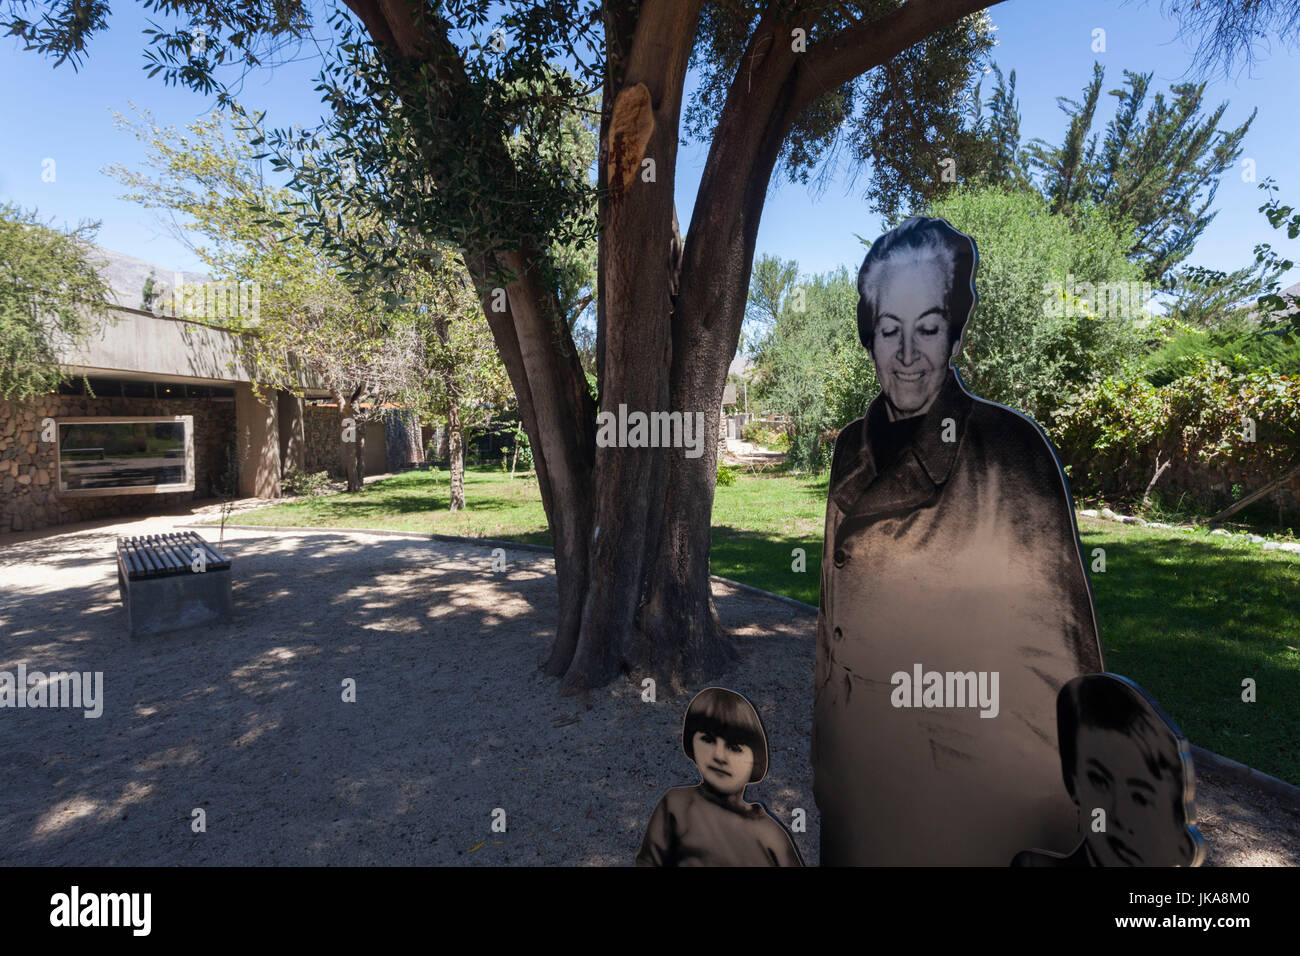 Chile Elqui Valley Vicuna Museo Gabriela Mistral Dedicated To Noble Prize Winning Poet Gabriela Mistral Artwork Stock Photo Alamy